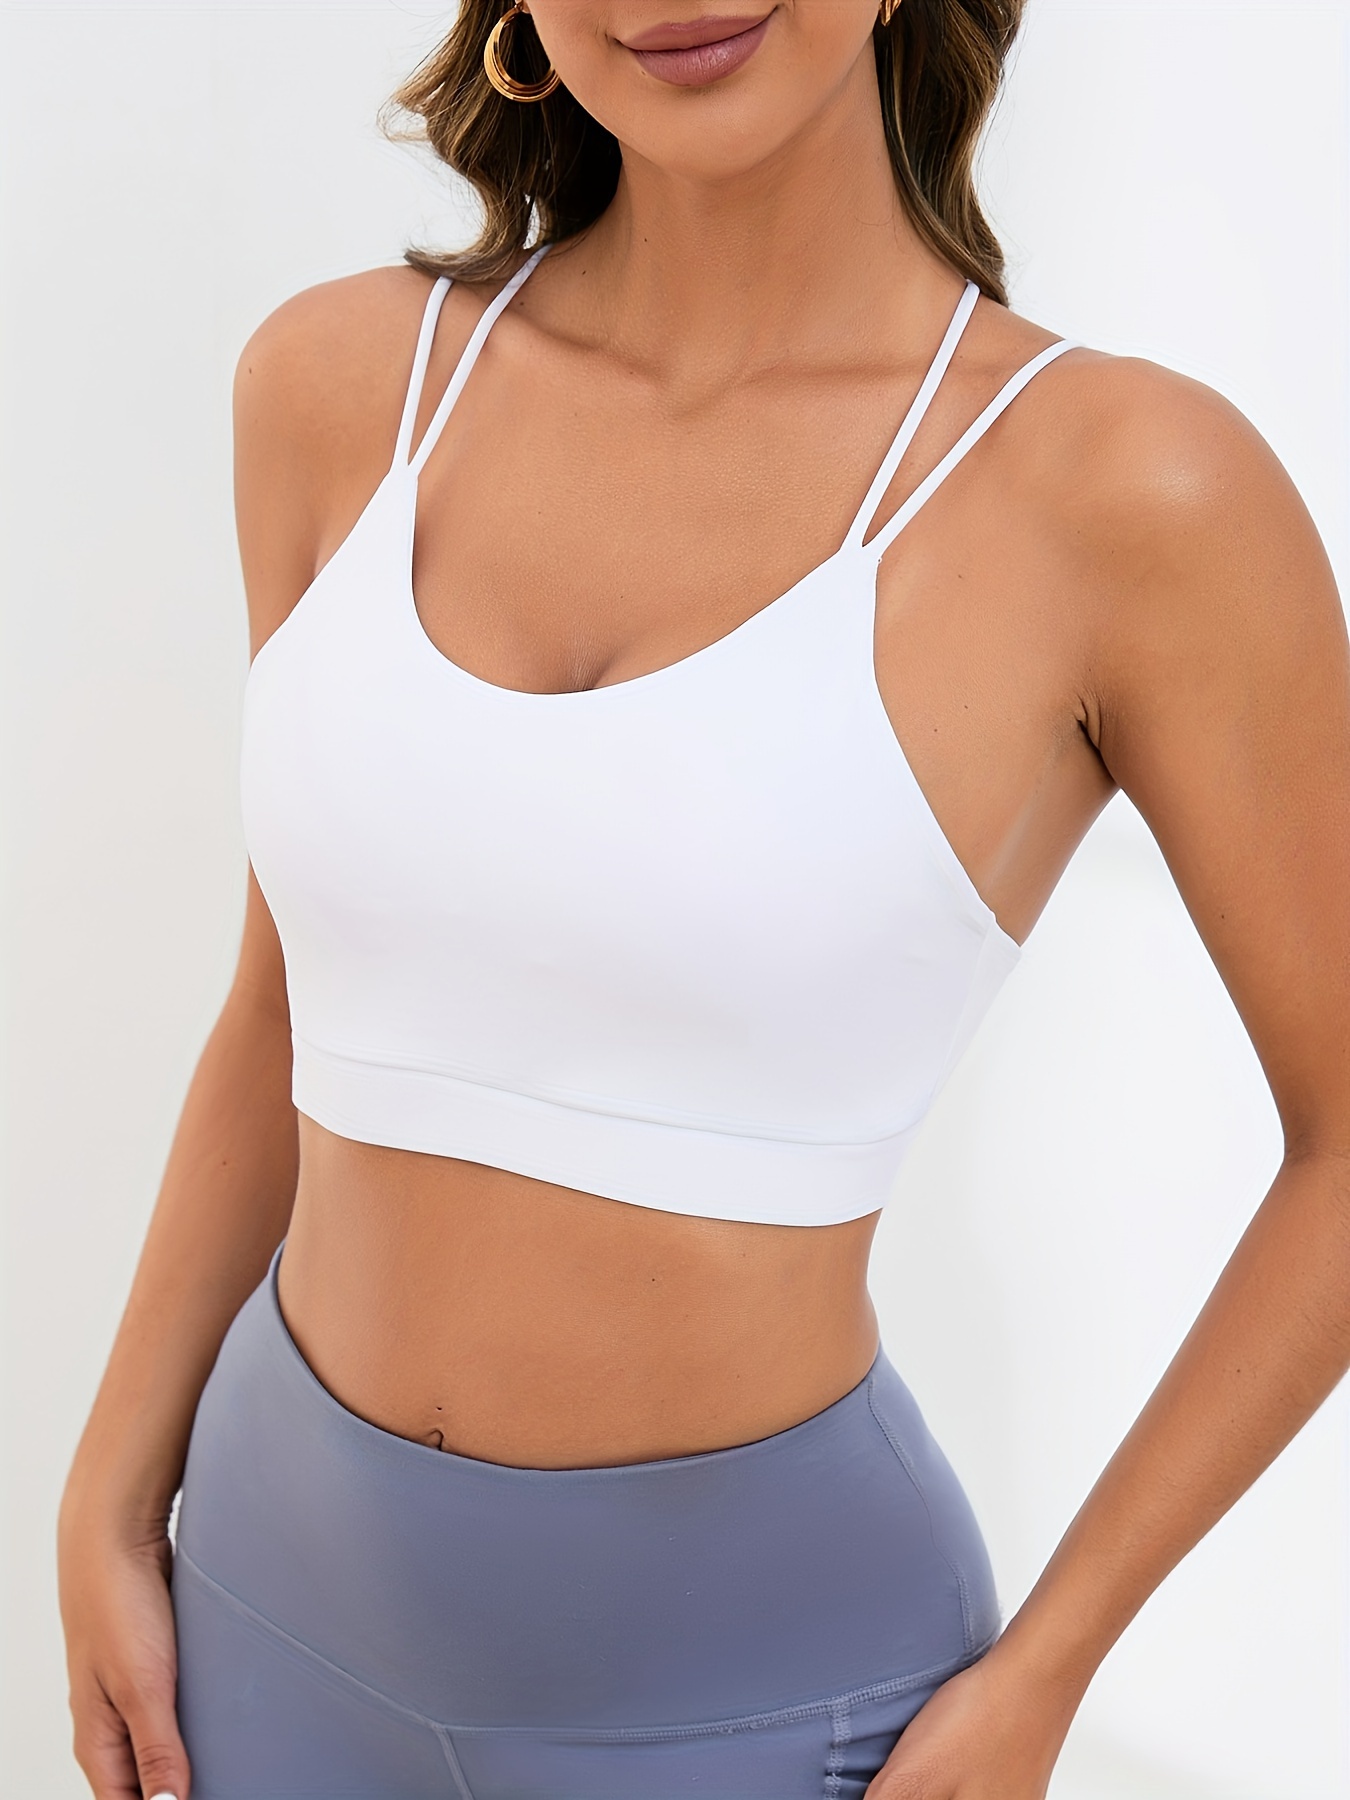 Women's Activewear: Seamless Double Strap Sports Bra with Criss-Cross Back  for Sexy Yoga Fitness Workouts